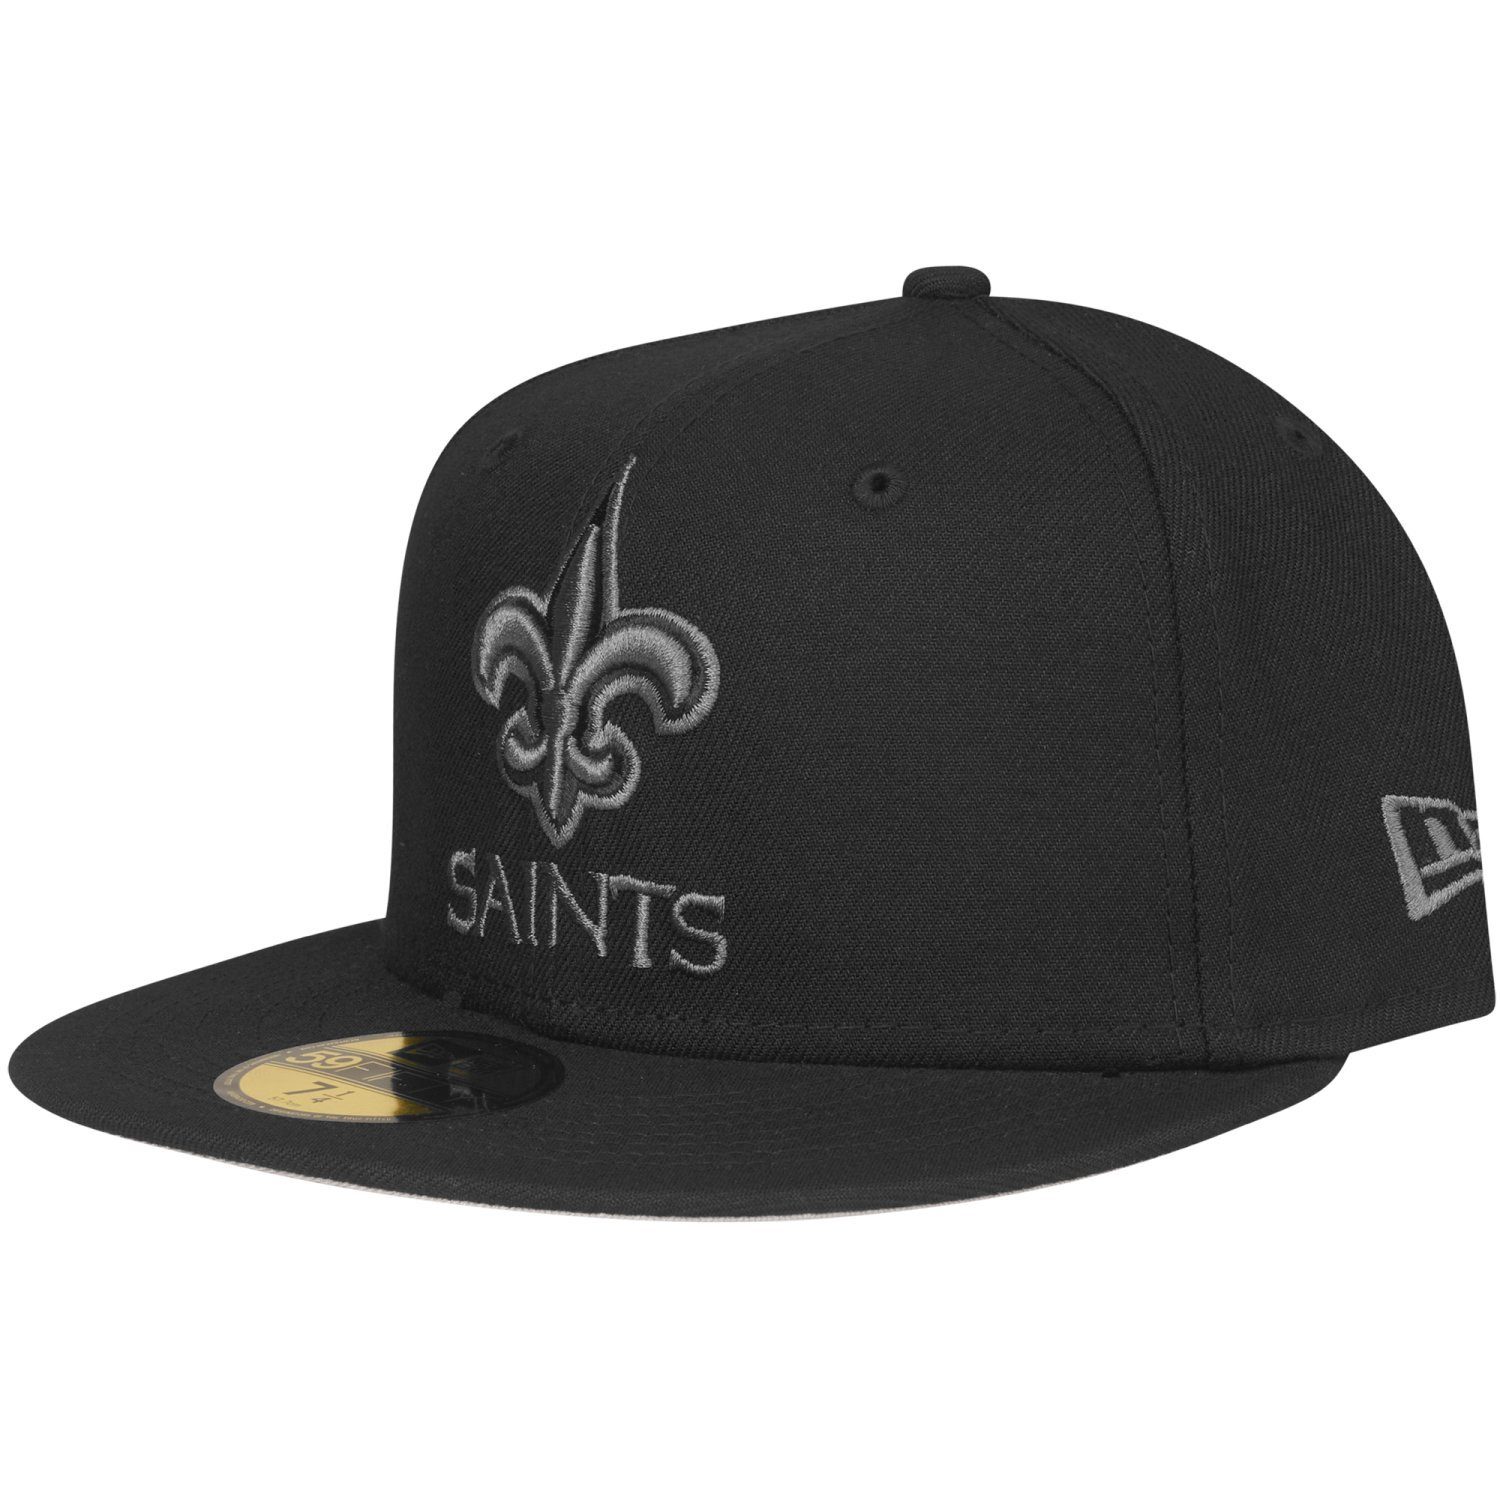 New Cap TEAMS 59Fifty Fitted NFL Orleans New Era Saints